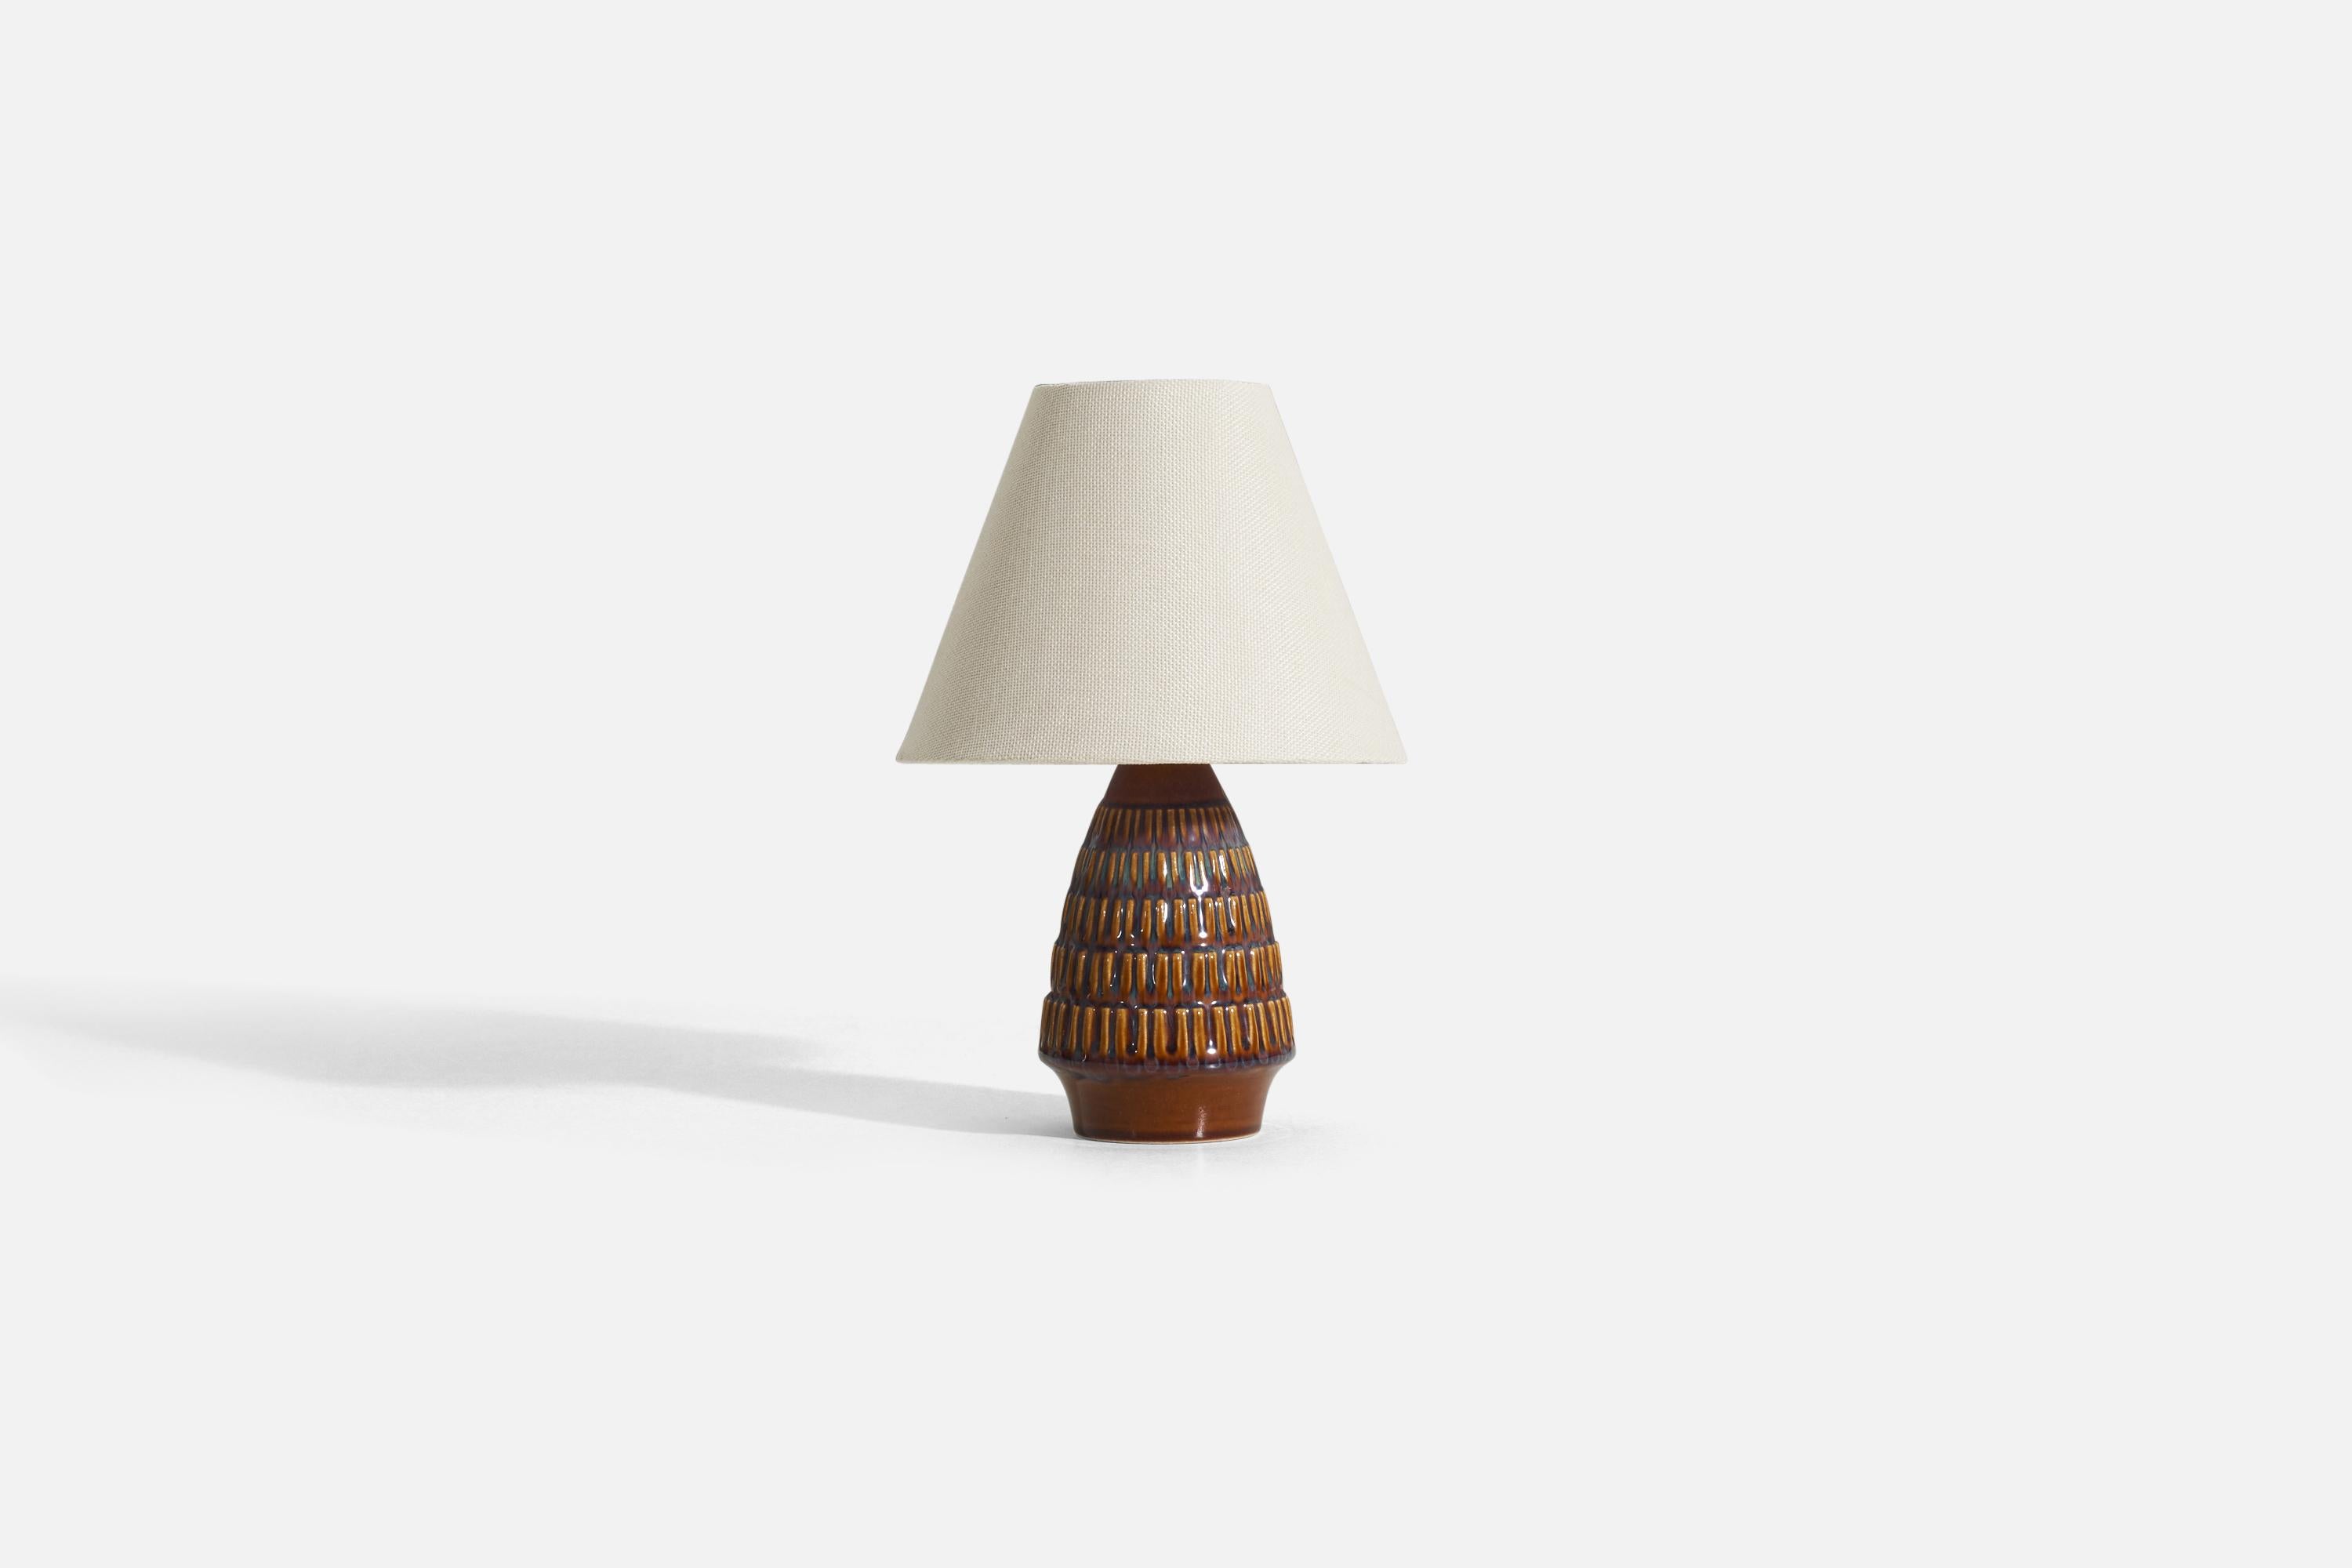 A brown and blue glazed stoneware table lamp, produced by Søholm Stentøj, Denmark, 1960s.

Sold without lampshade. 

Dimensions of lamp (inches) : 8.5 x 4 x 4 (H x W x D).
Dimensions shade (inches) : 3.75 x 8 x 6.25 (T x B x H).
Dimension of